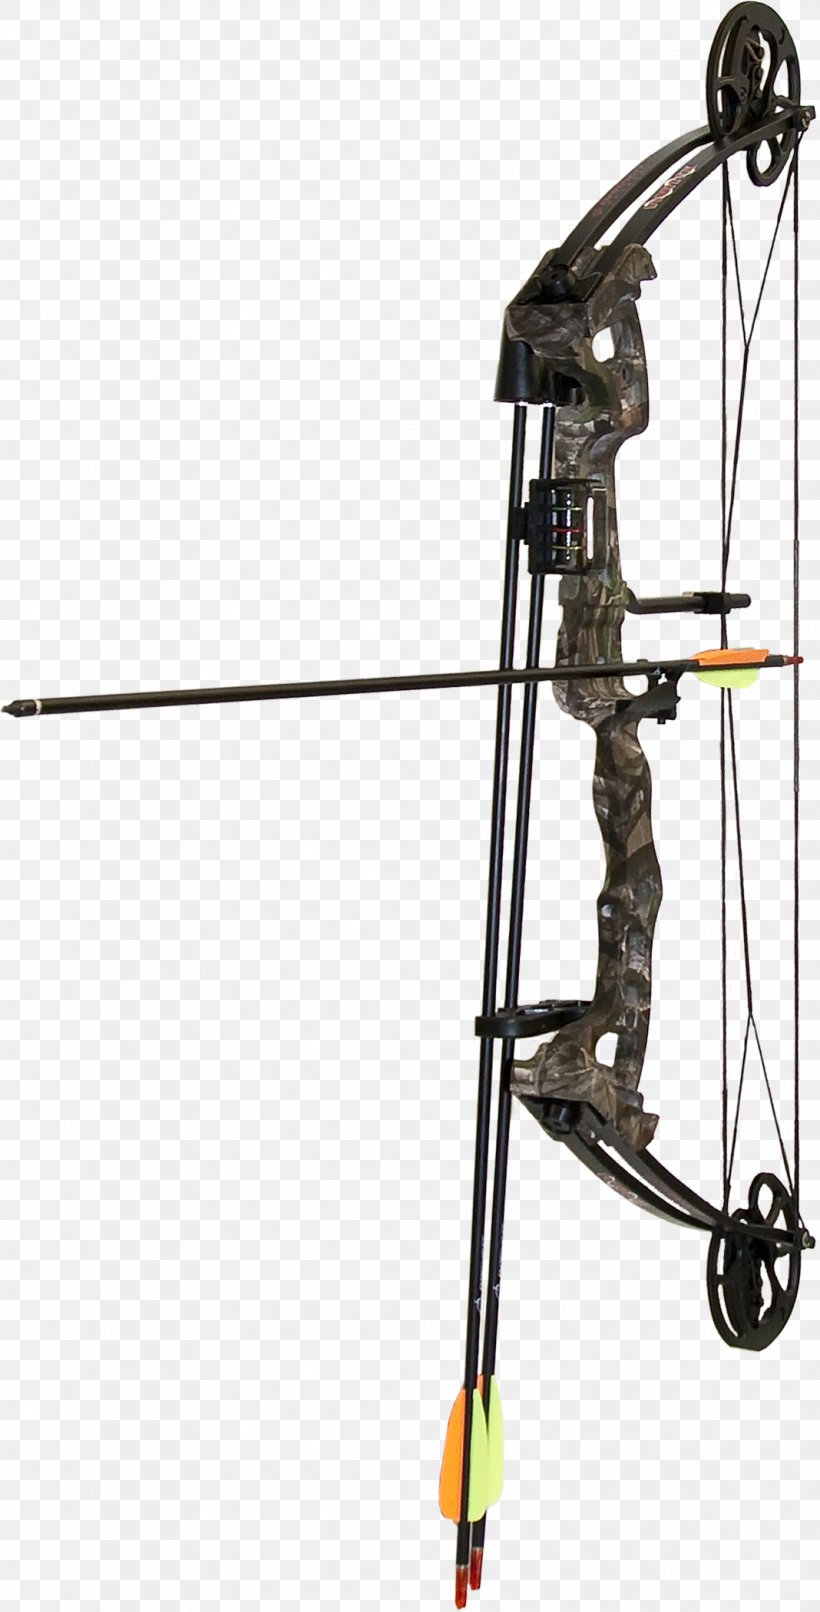 Compound Bows Bow And Arrow Archery Hunting, PNG, 1068x2100px, Compound Bows, Archery, Bow, Bow And Arrow, Bowhunting Download Free